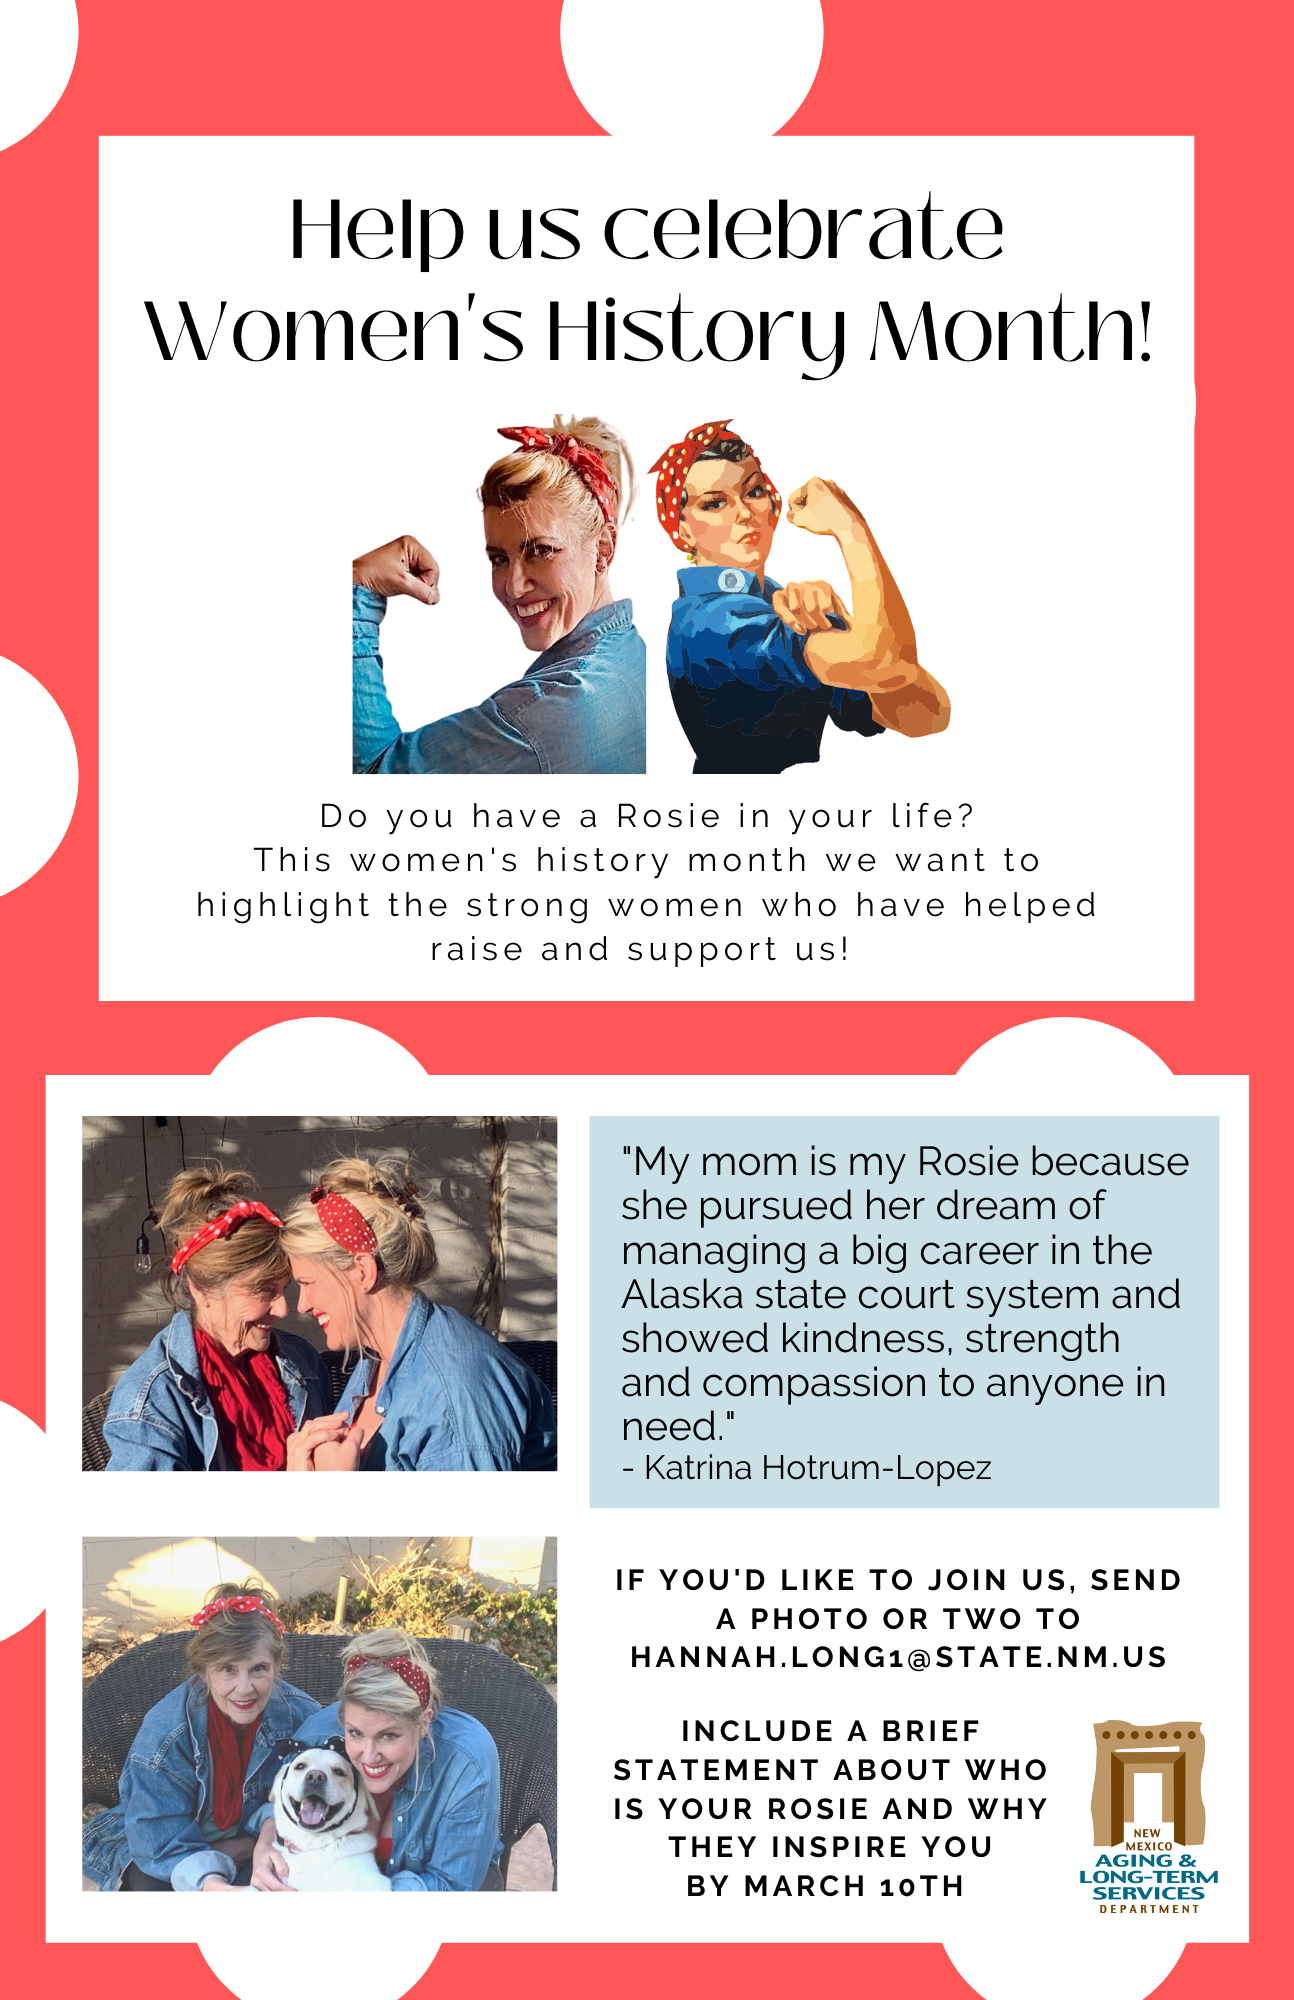 If you'd like to join us, send a photo or two to: hannah.long1@state.nm.us . Include a brief statement about who is your Rosie and why they inspire you by March 10th.